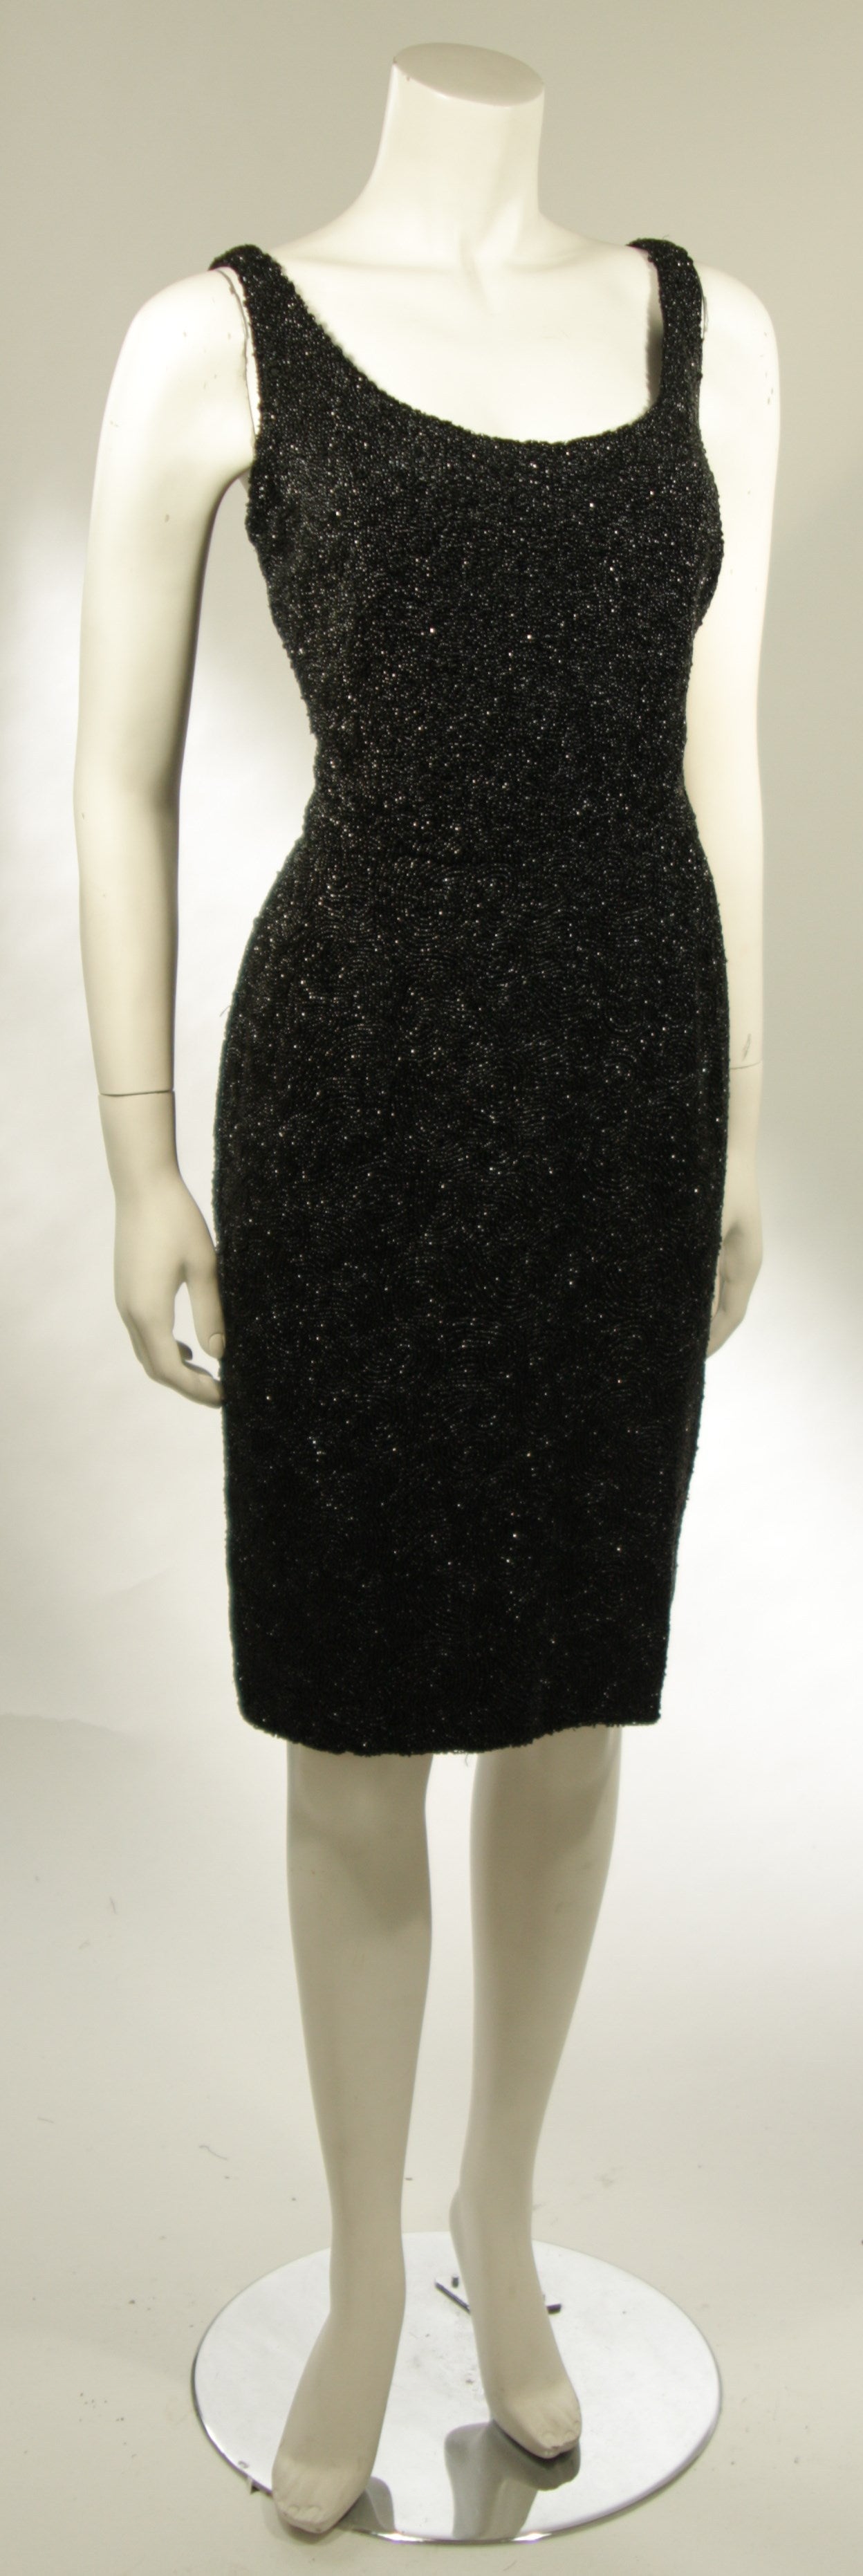 Women's 1960's Rare Black Caviar Beaded Cocktail Dress Size Large For Sale